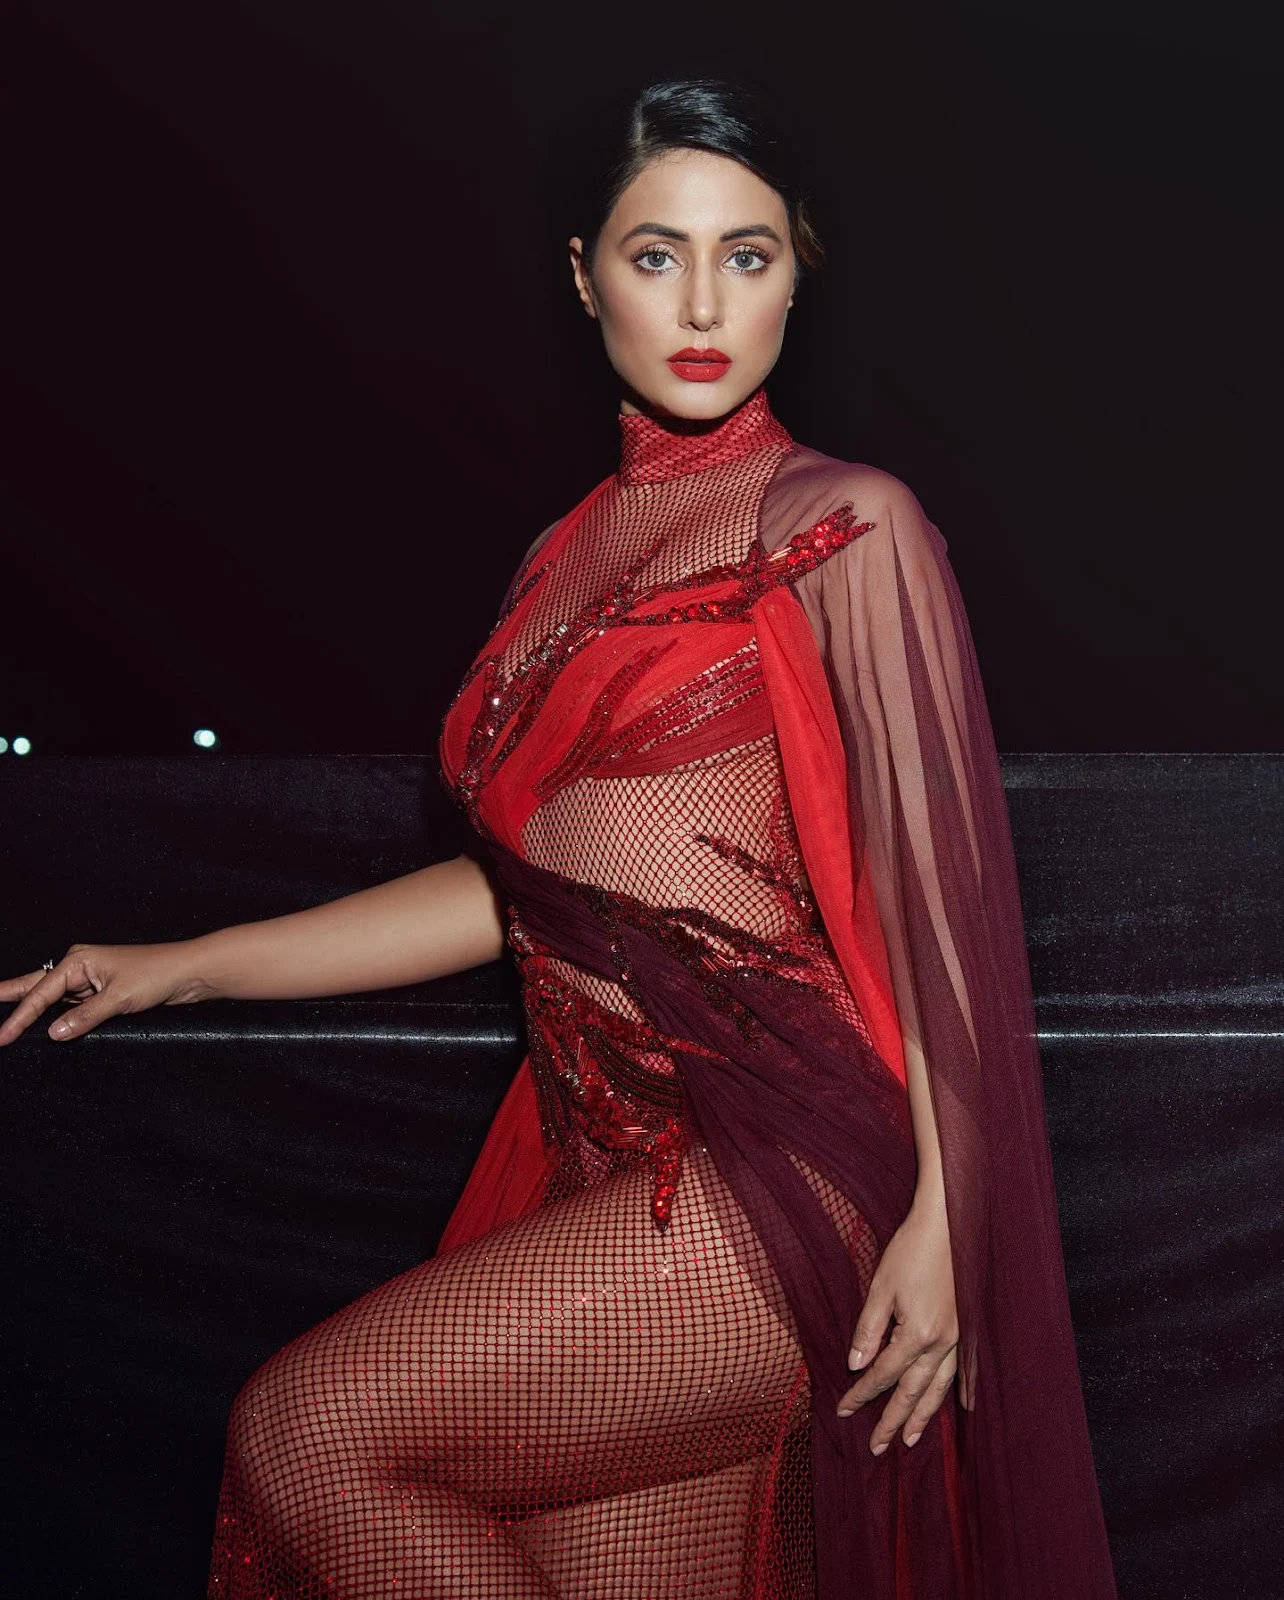 hina khan legs sheer red outfit